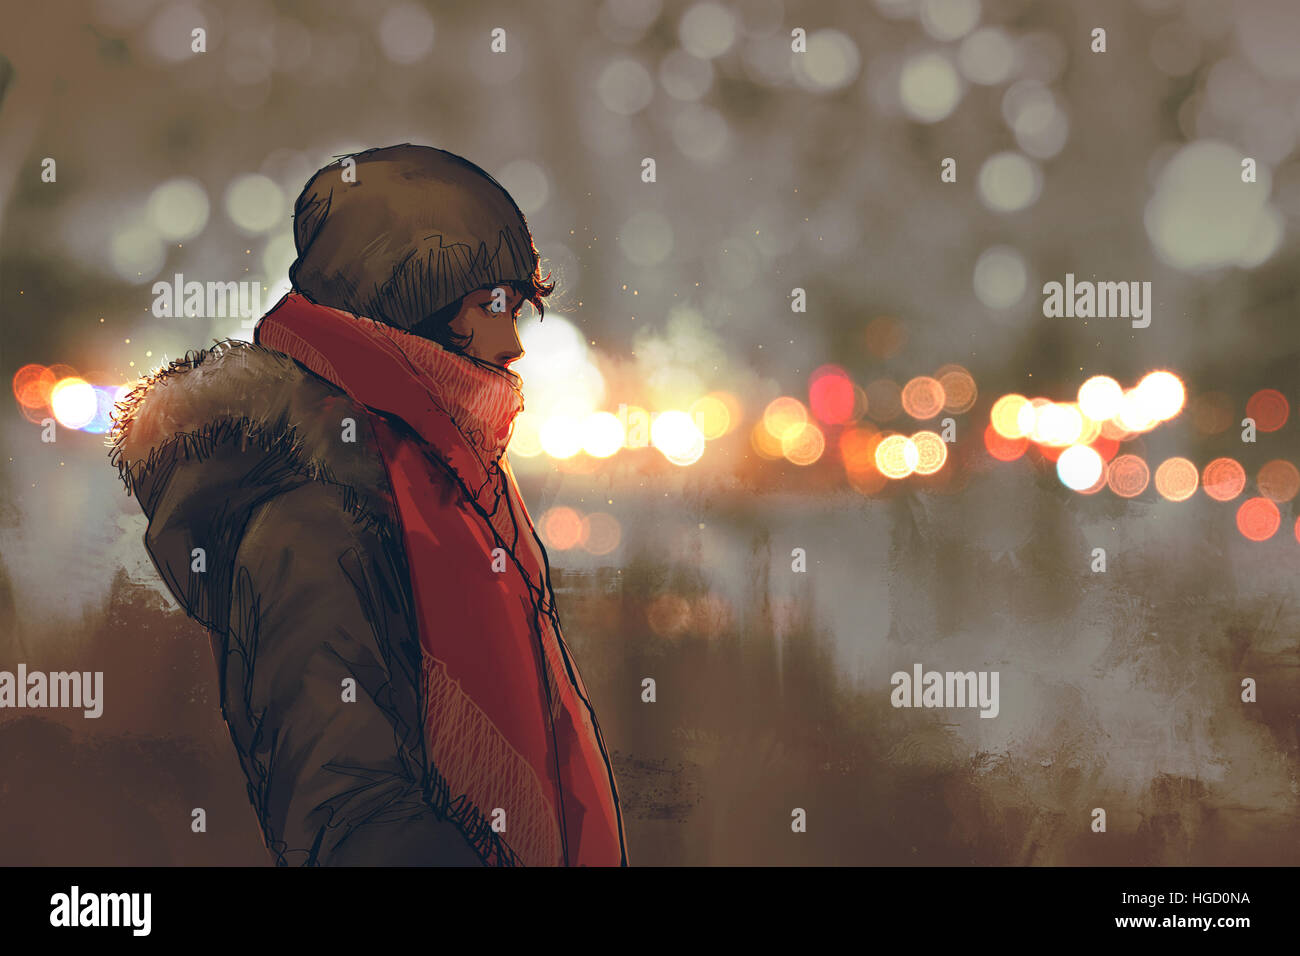 outdoor portrait of young man in winter with bokeh light on background,illustration painting Stock Photo